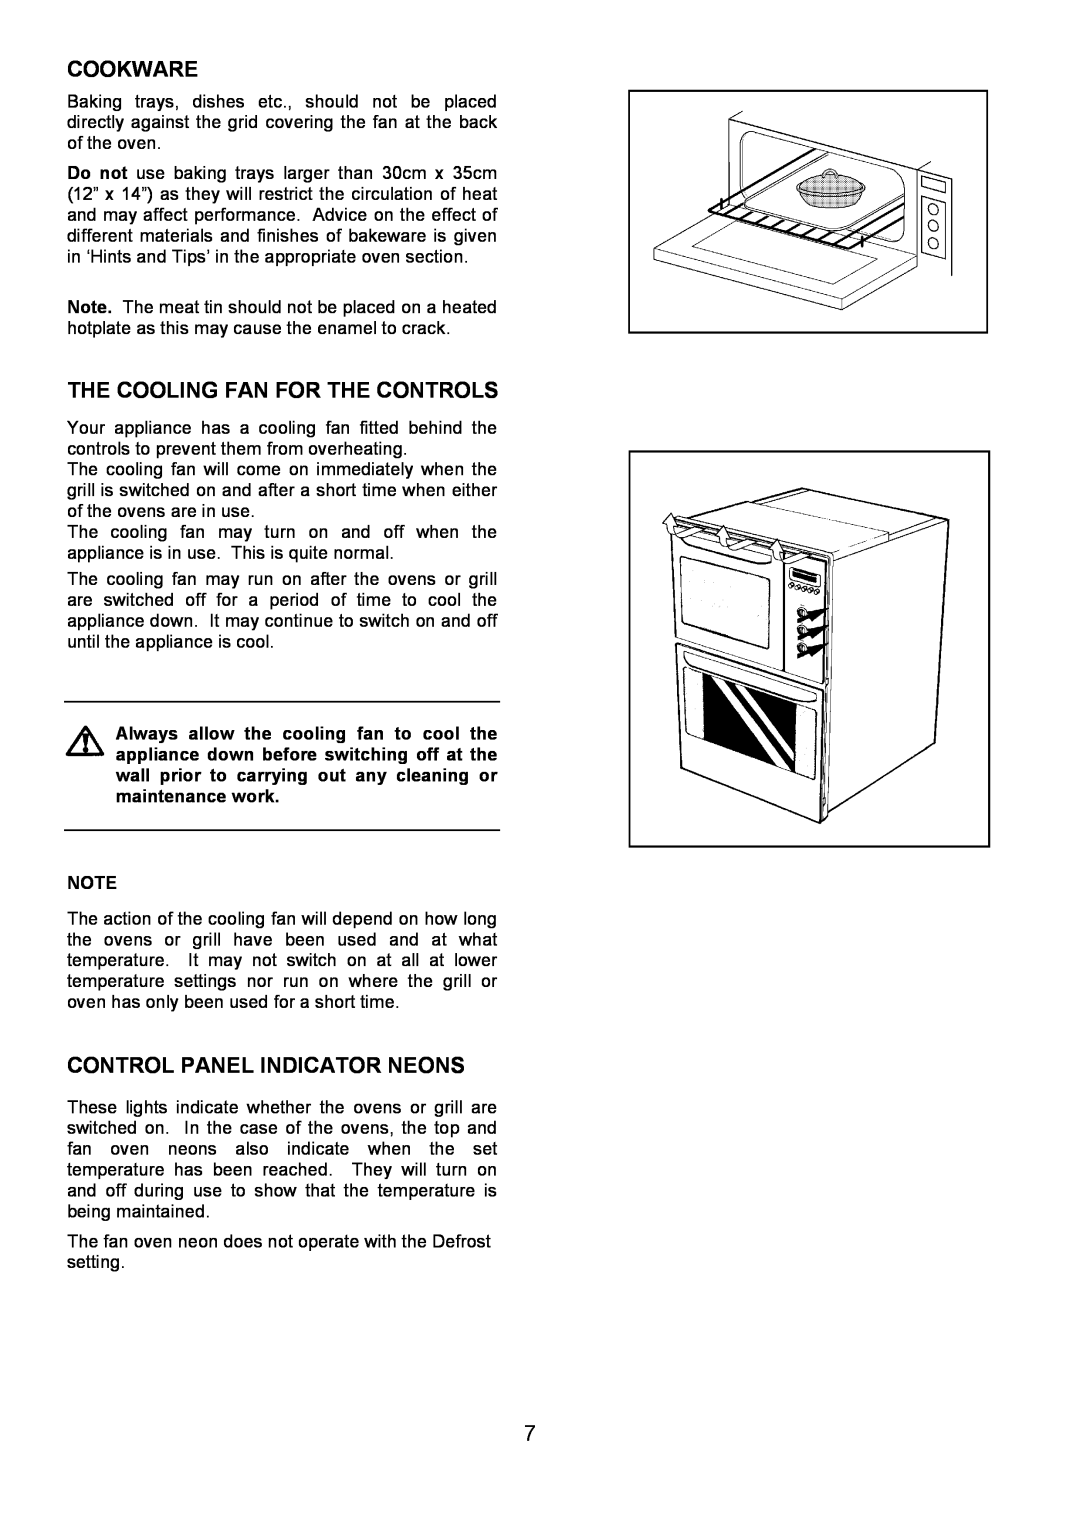 AEG 3210 BU installation instructions Cookware, The Cooling Fan For The Controls, Control Panel Indicator Neons 